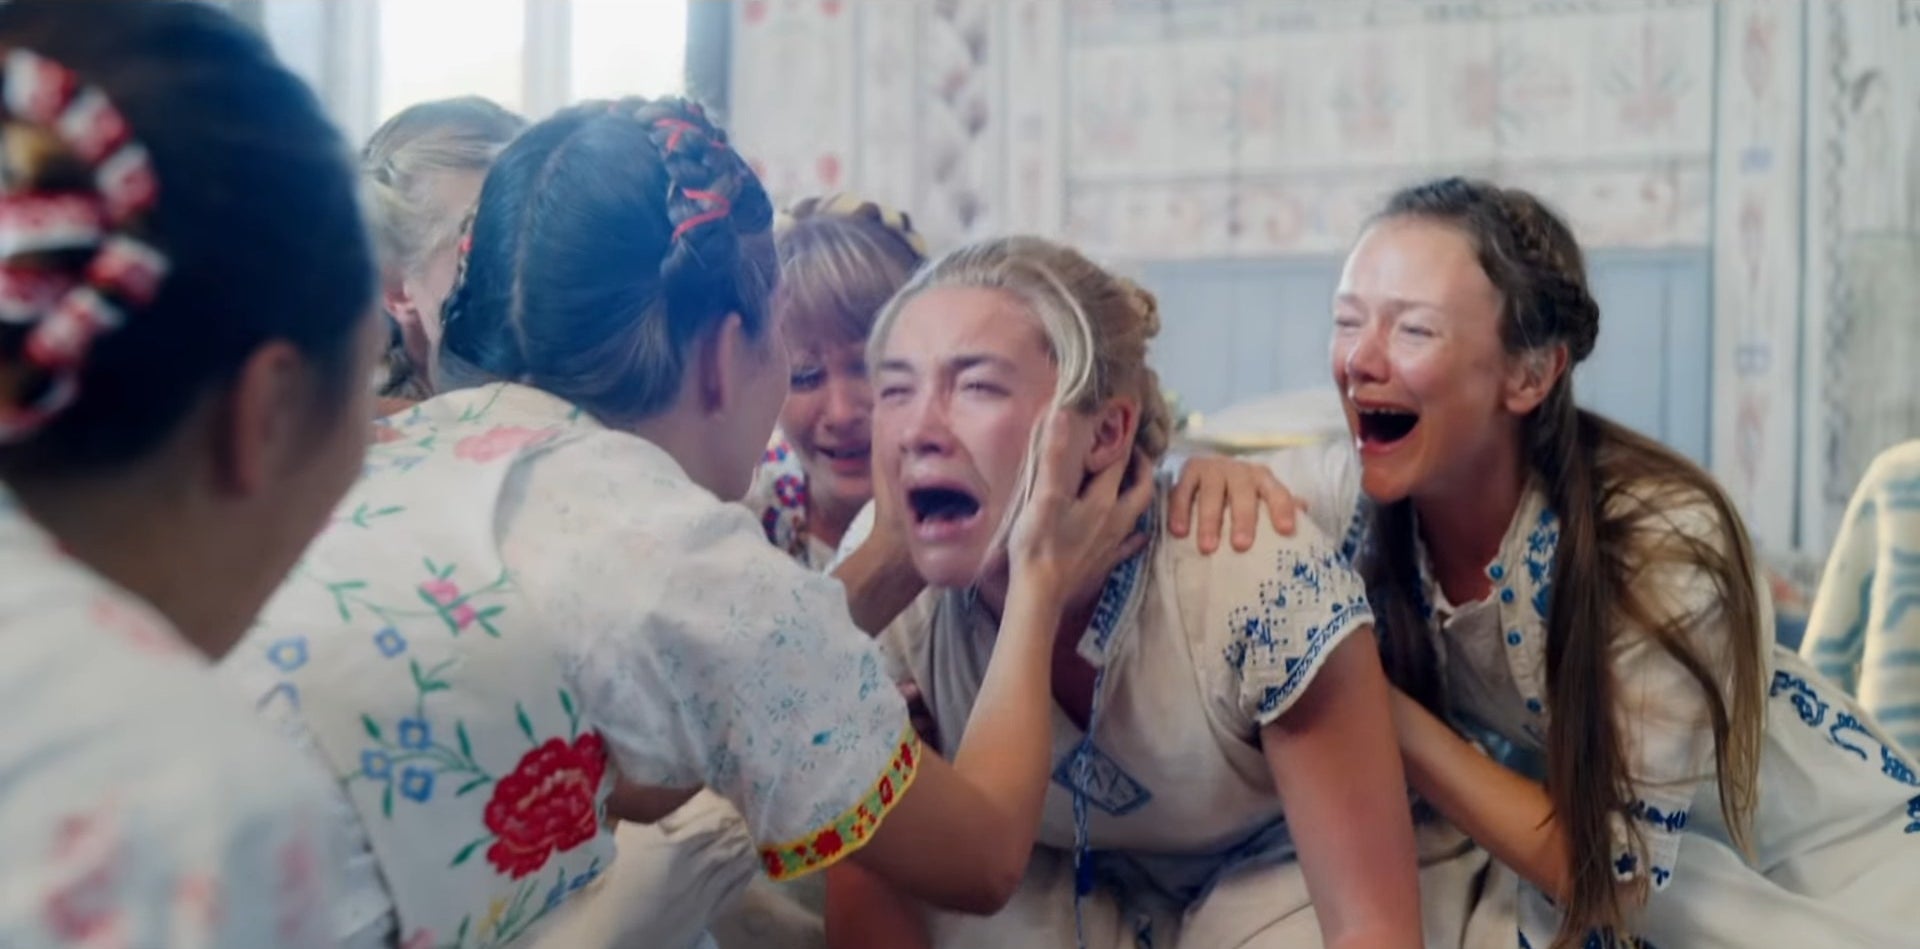 Dani crying with many other women in &quot;Midsommar&quot;